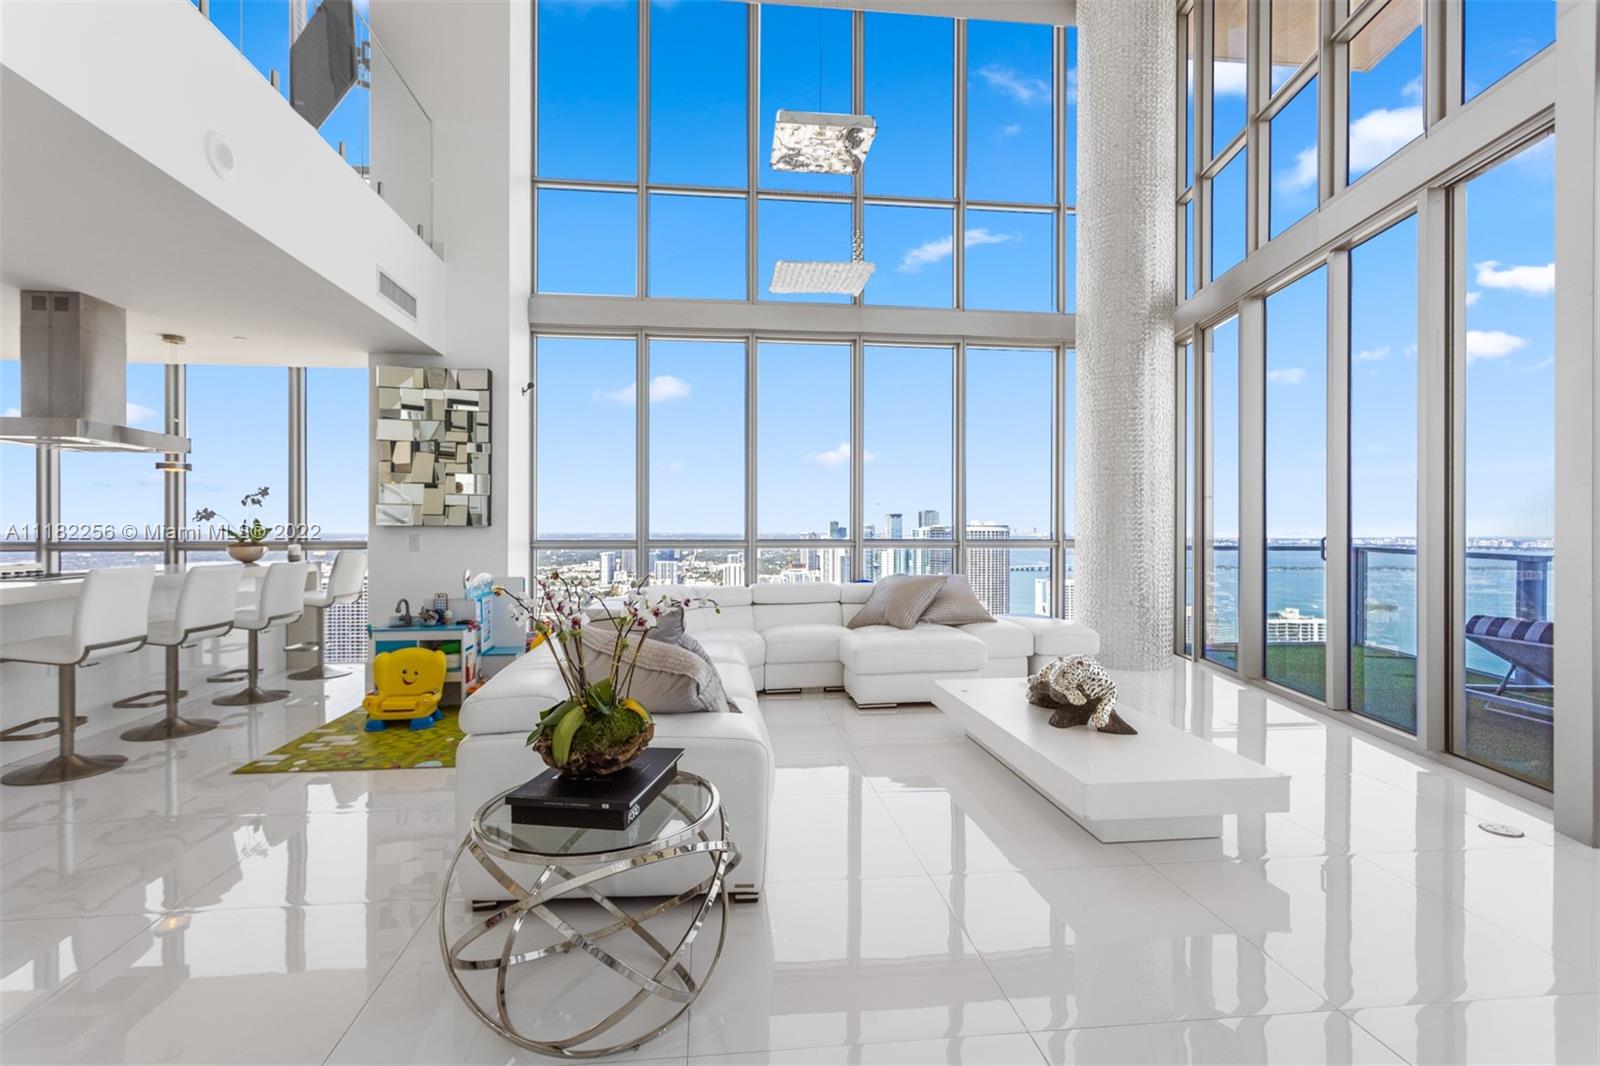 A MUST SEE - STUNNING - ENDLESS WATER VIEWS OF BISCAYNE BAY, MIAMI BEACH, AND MORE FROM THIS ONE OF A KIND 4 BED/4.5 BATH 3,800 SF CORNER UNIT. TOTALLY AND IMPECCABLY UPGRADED FEATURING HIGH CEILINGS. OPEN MODERN KITCHEN. LOTS OF NATURAL LIGHTS. SPECTACULAR SPACIOUS PRIVATE TERRACE. BUILT-IN LARGE WALKING CLOSETS. ENJOY ALL 5 STARTS HOTEL AMENITIES MARQUIS OFFERS: POOL, POOL RESTAURANT, EXERCISE ROOM, SAUNA, SPA, OFFICE CENTER, YOGA ROOM, PLAY/PARTY ROOM, BEACH CLUB. CONVENIENTLY LOCATED CLOSE TO DESIGN DISTRICT, FTX ARENA, THE ADRIENNE ARSHT CENTER, SHOPPINGS, RESTAURANTS.